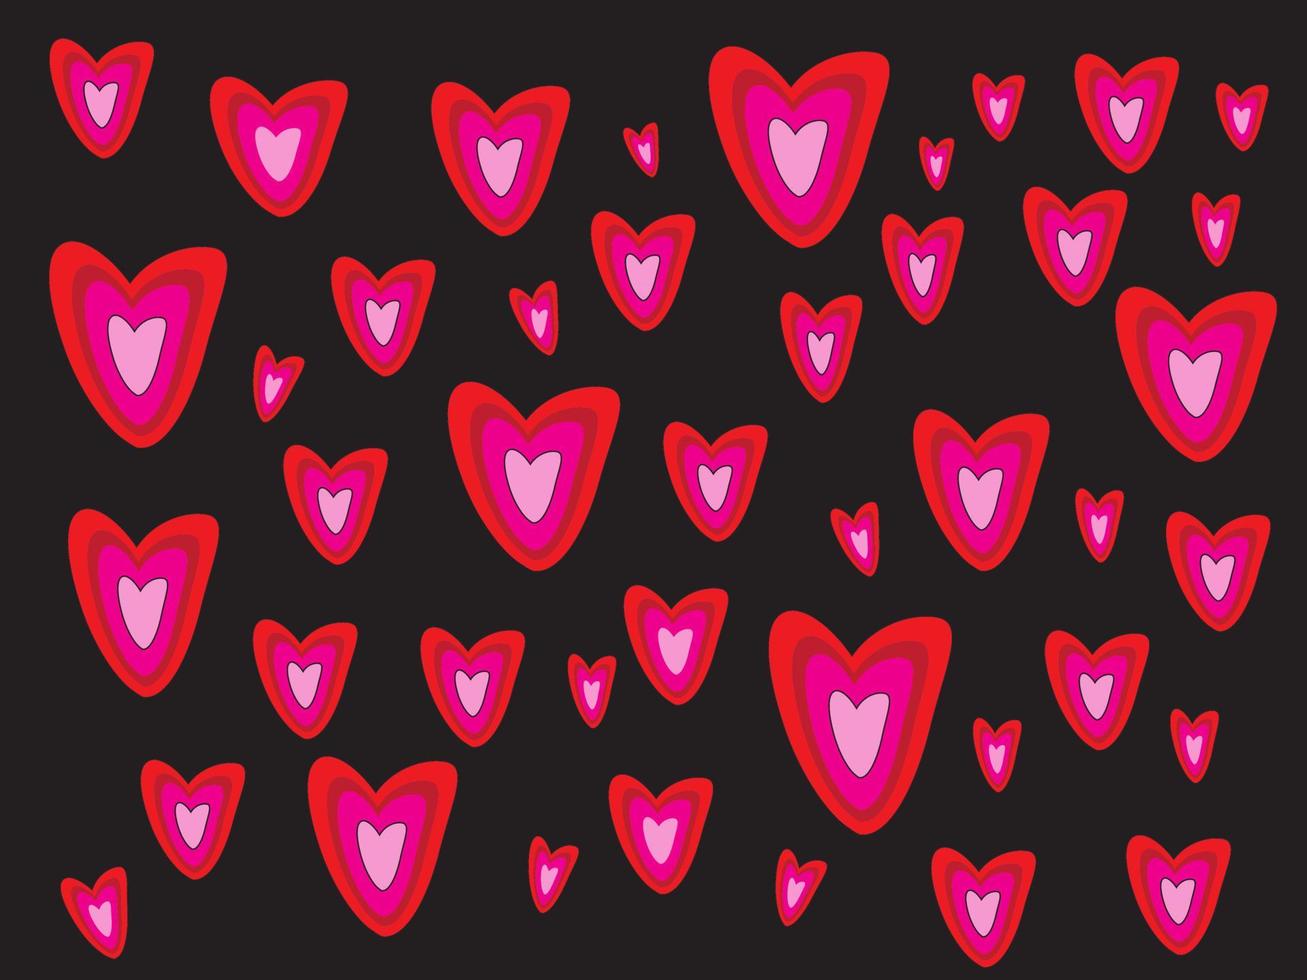 Simple heart seamless pattern. Valentines day background. Endless chaotic texture flat design made of small hearts silhouette. Shades of red on a black background vector